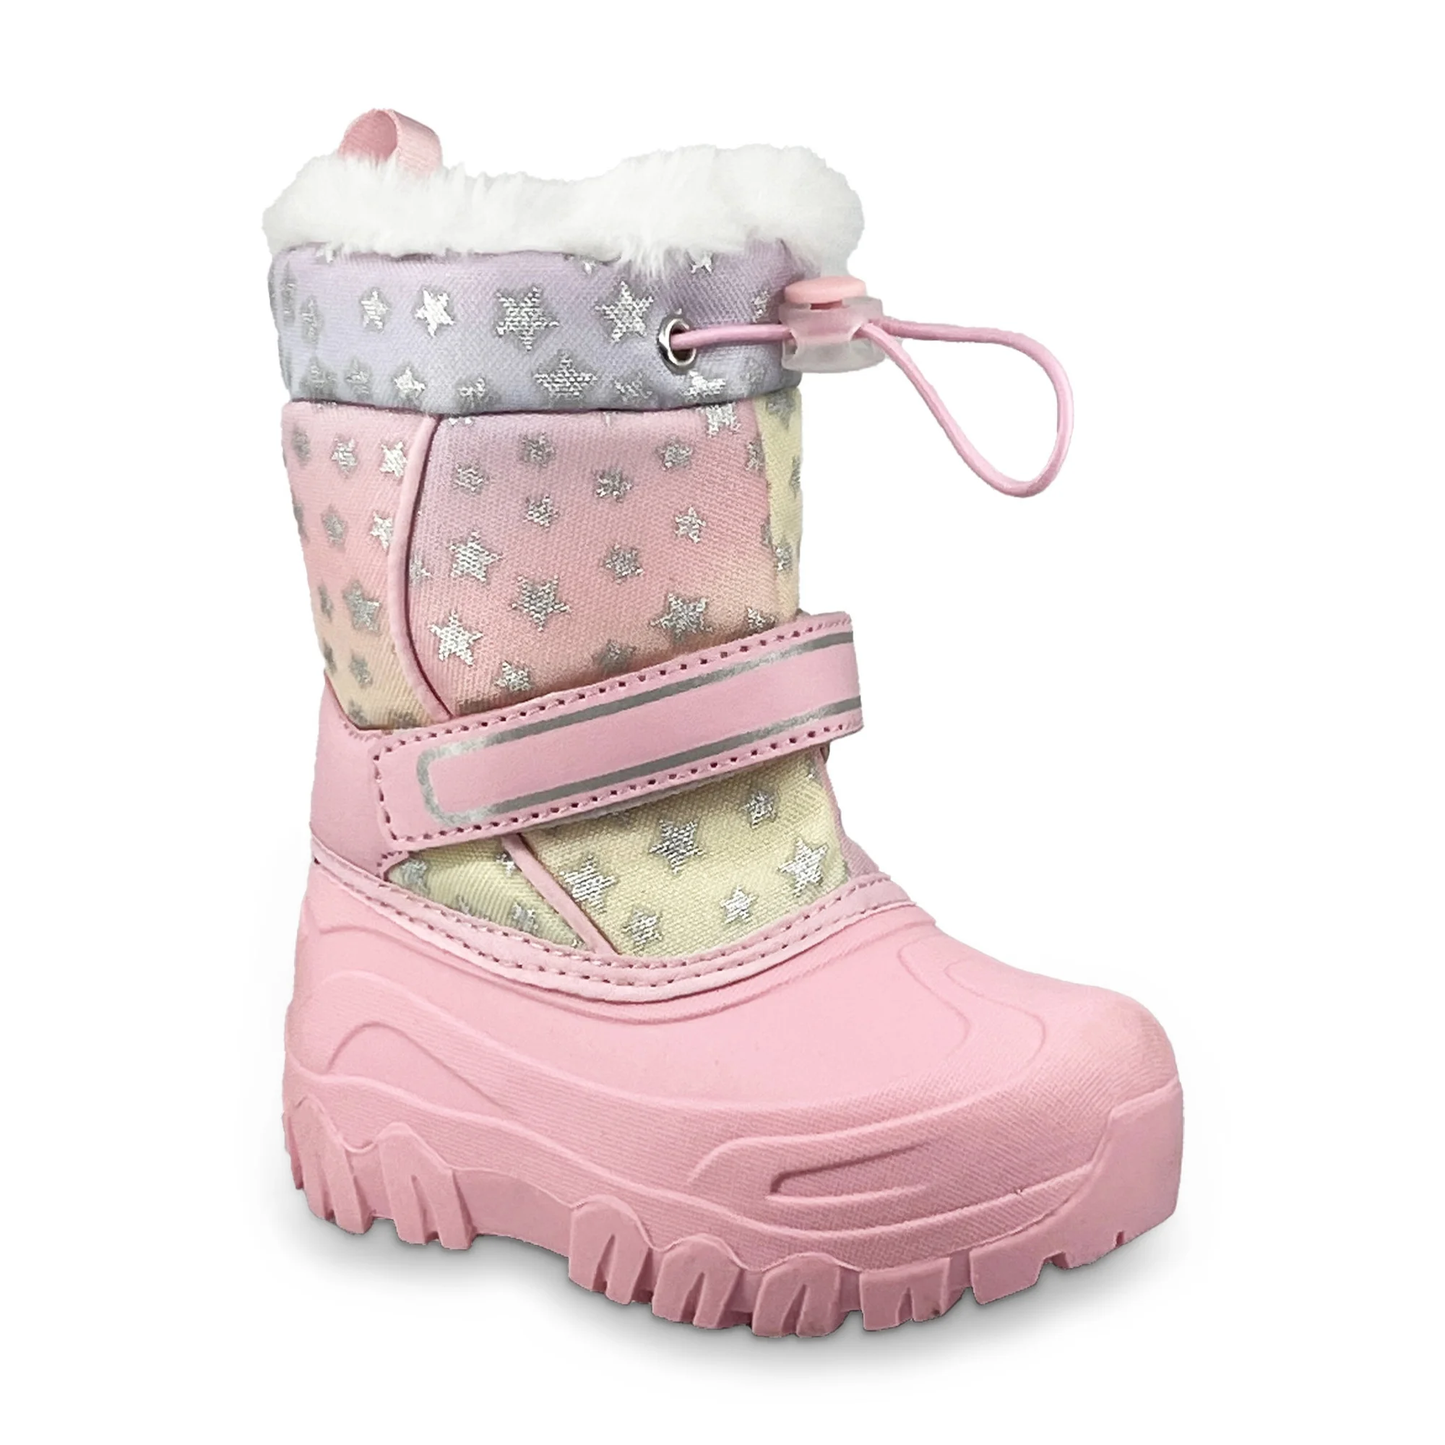 Toddler & Kids Hook-And-Loop Closure Snow Boots